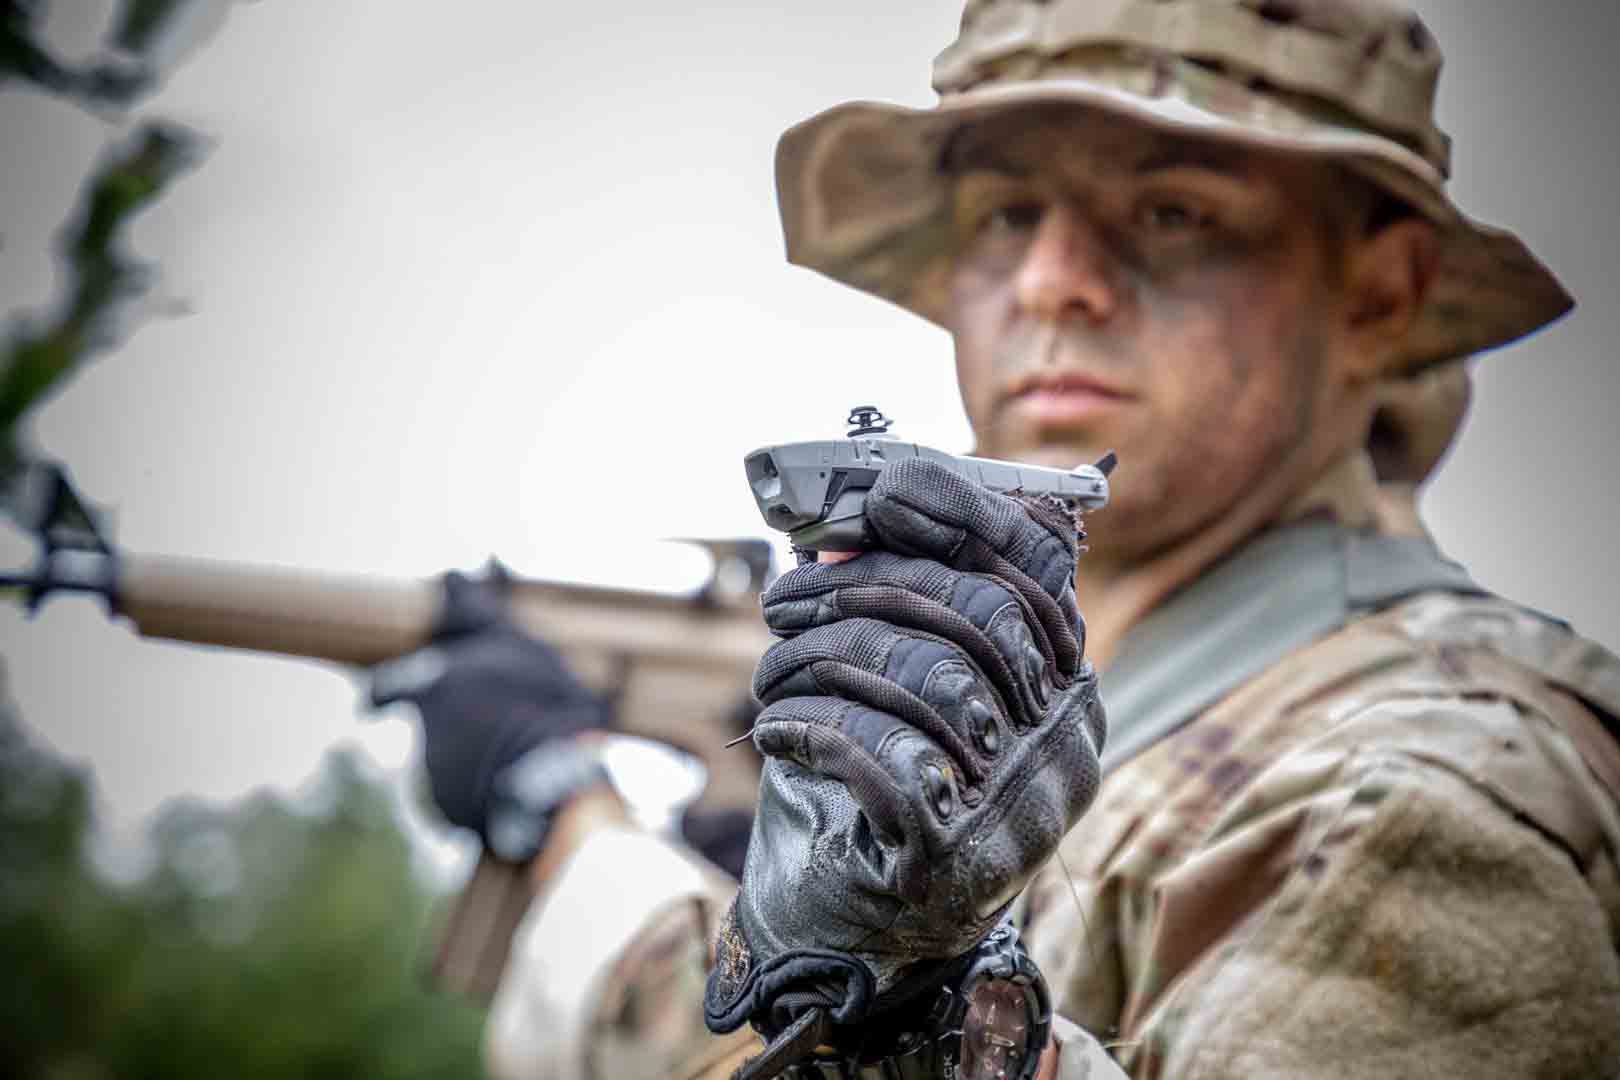 A soldier holds a small flying drone, smaller than the size of his hand